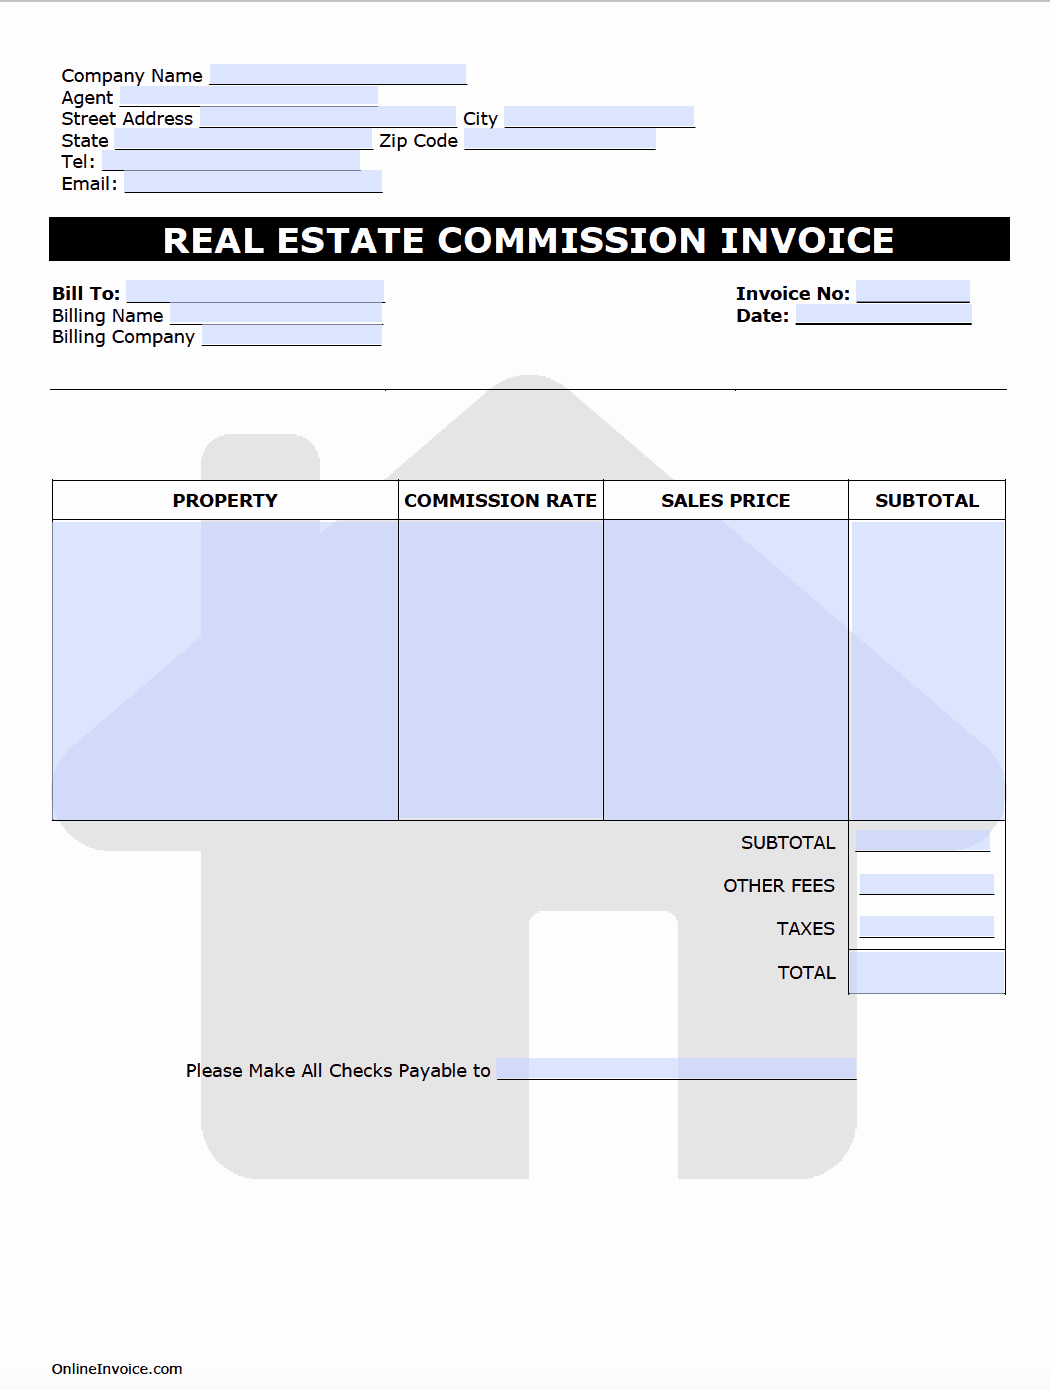 Real Estate Commission Invoice Inspirational Real Estate Mission Invoice Template Lineinvoice